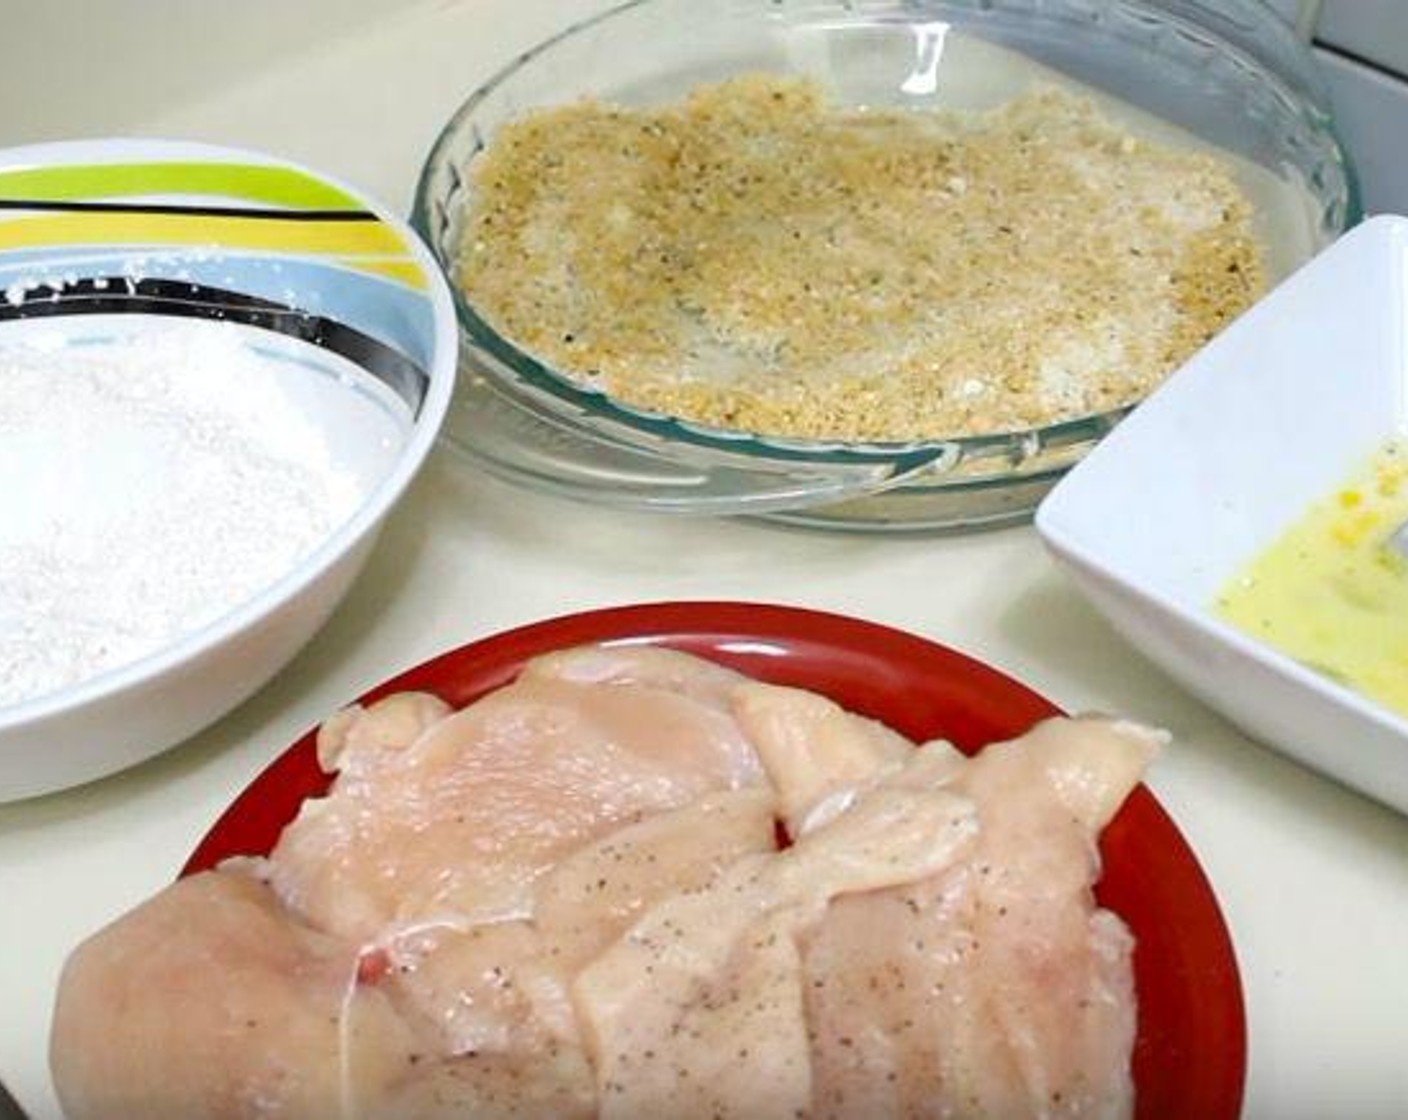 step 1 In a mixing bowl, add All-Purpose Flour (3/4 cup), Salt (to taste), and Ground Black Pepper (to taste). In another bowl, add Eggs (2), Milk (1/4 cup), and additional salt and pepper and whisk together. In a final bowl, add Seasoned Panko Breadcrumbs (1 1/4 cups) and Parmesan Cheese (1/2 cup) and stir together.